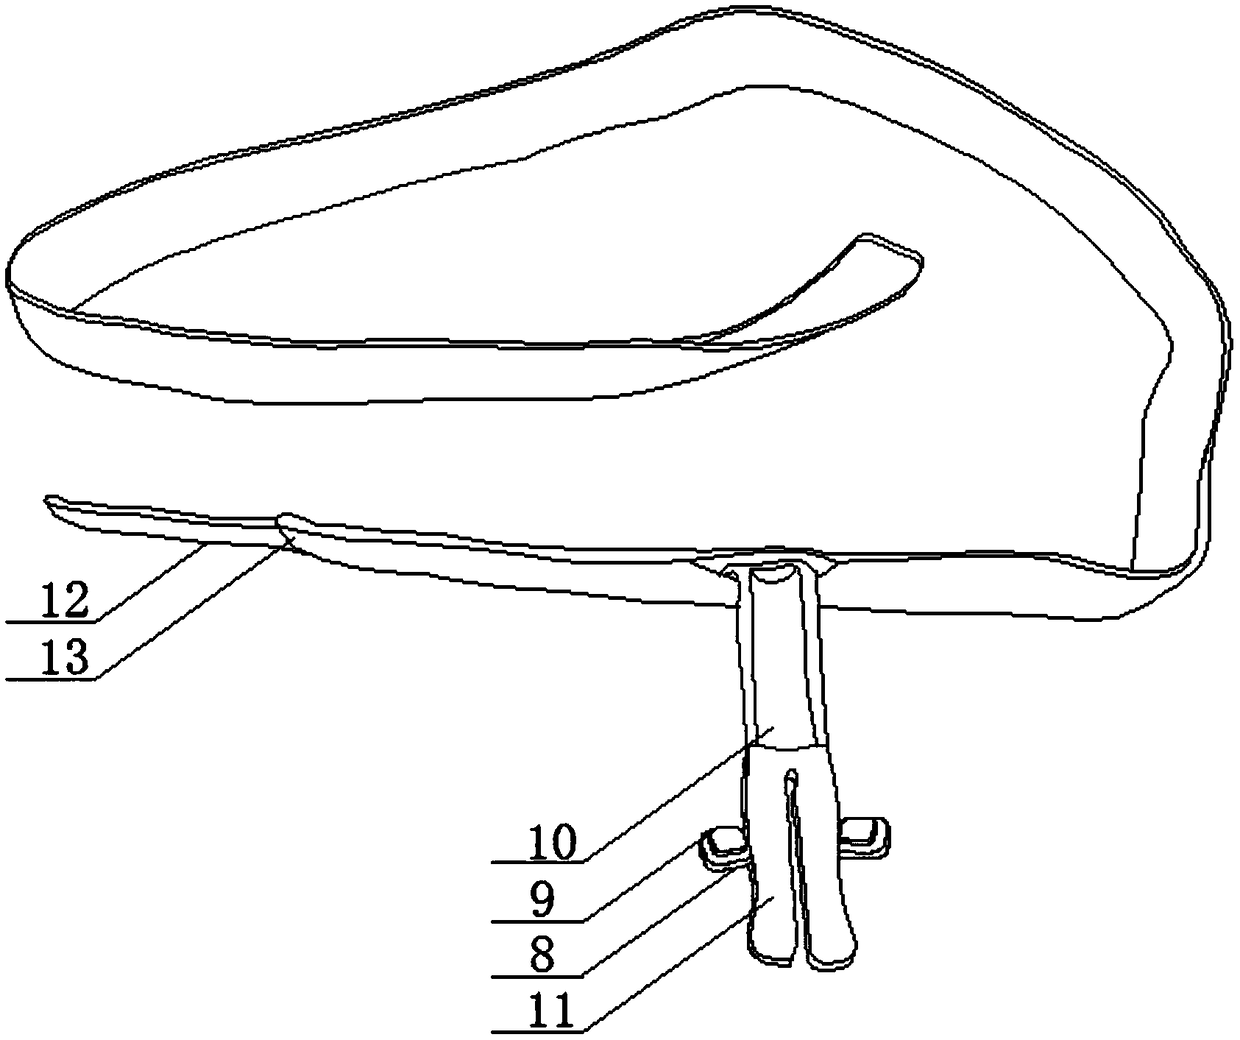 Oral trachea cannula fixing and buckling device